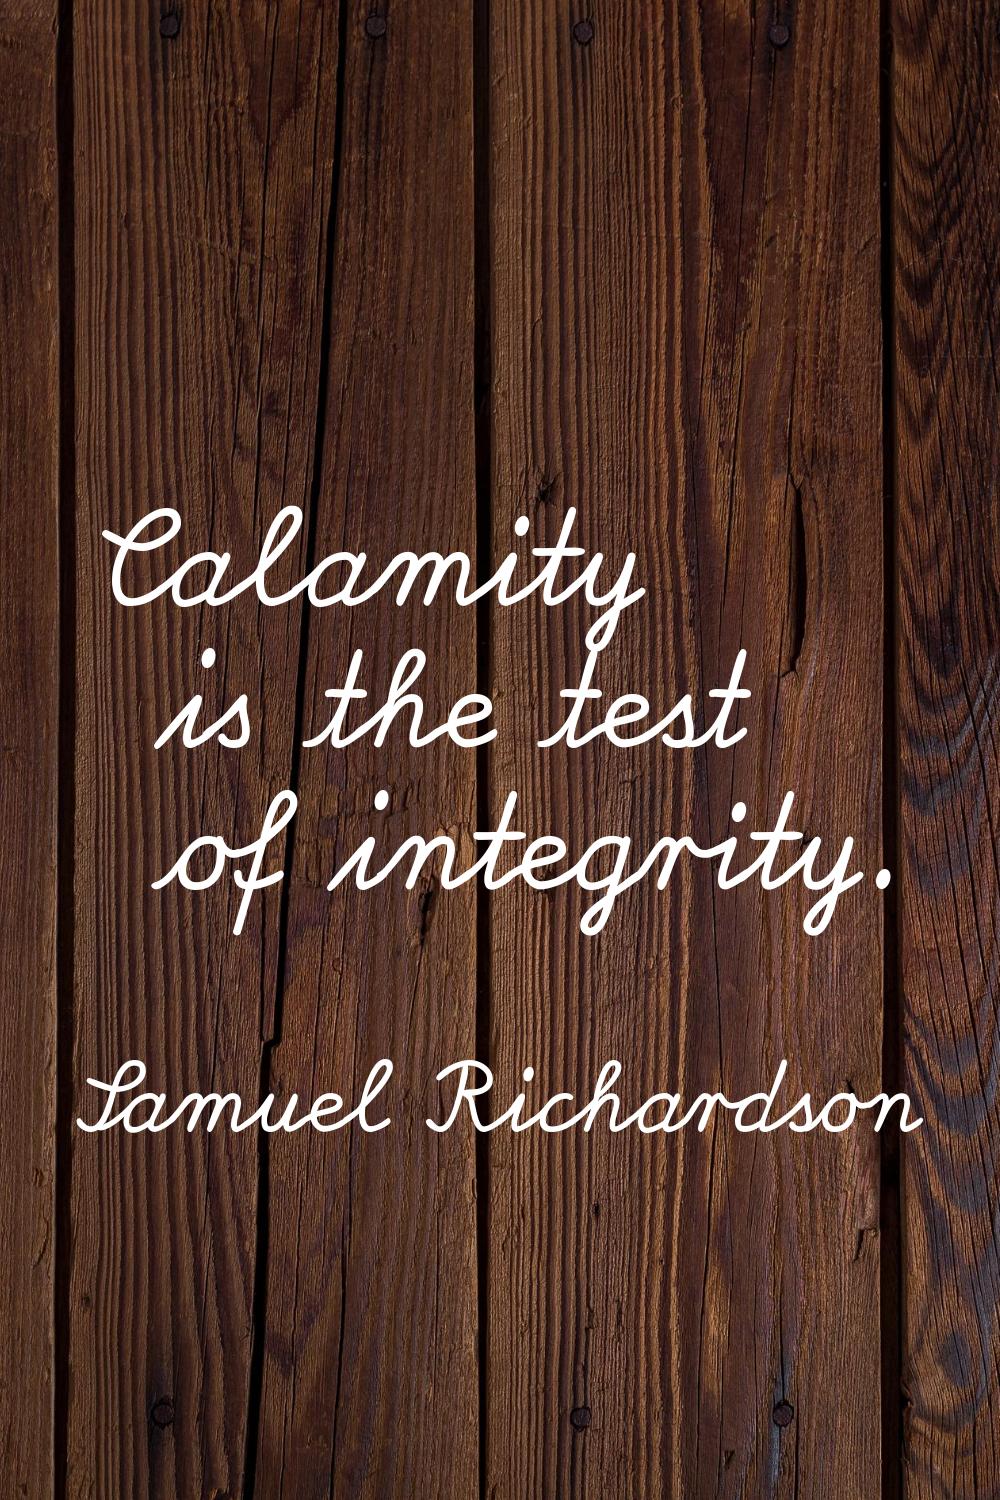 Calamity is the test of integrity.